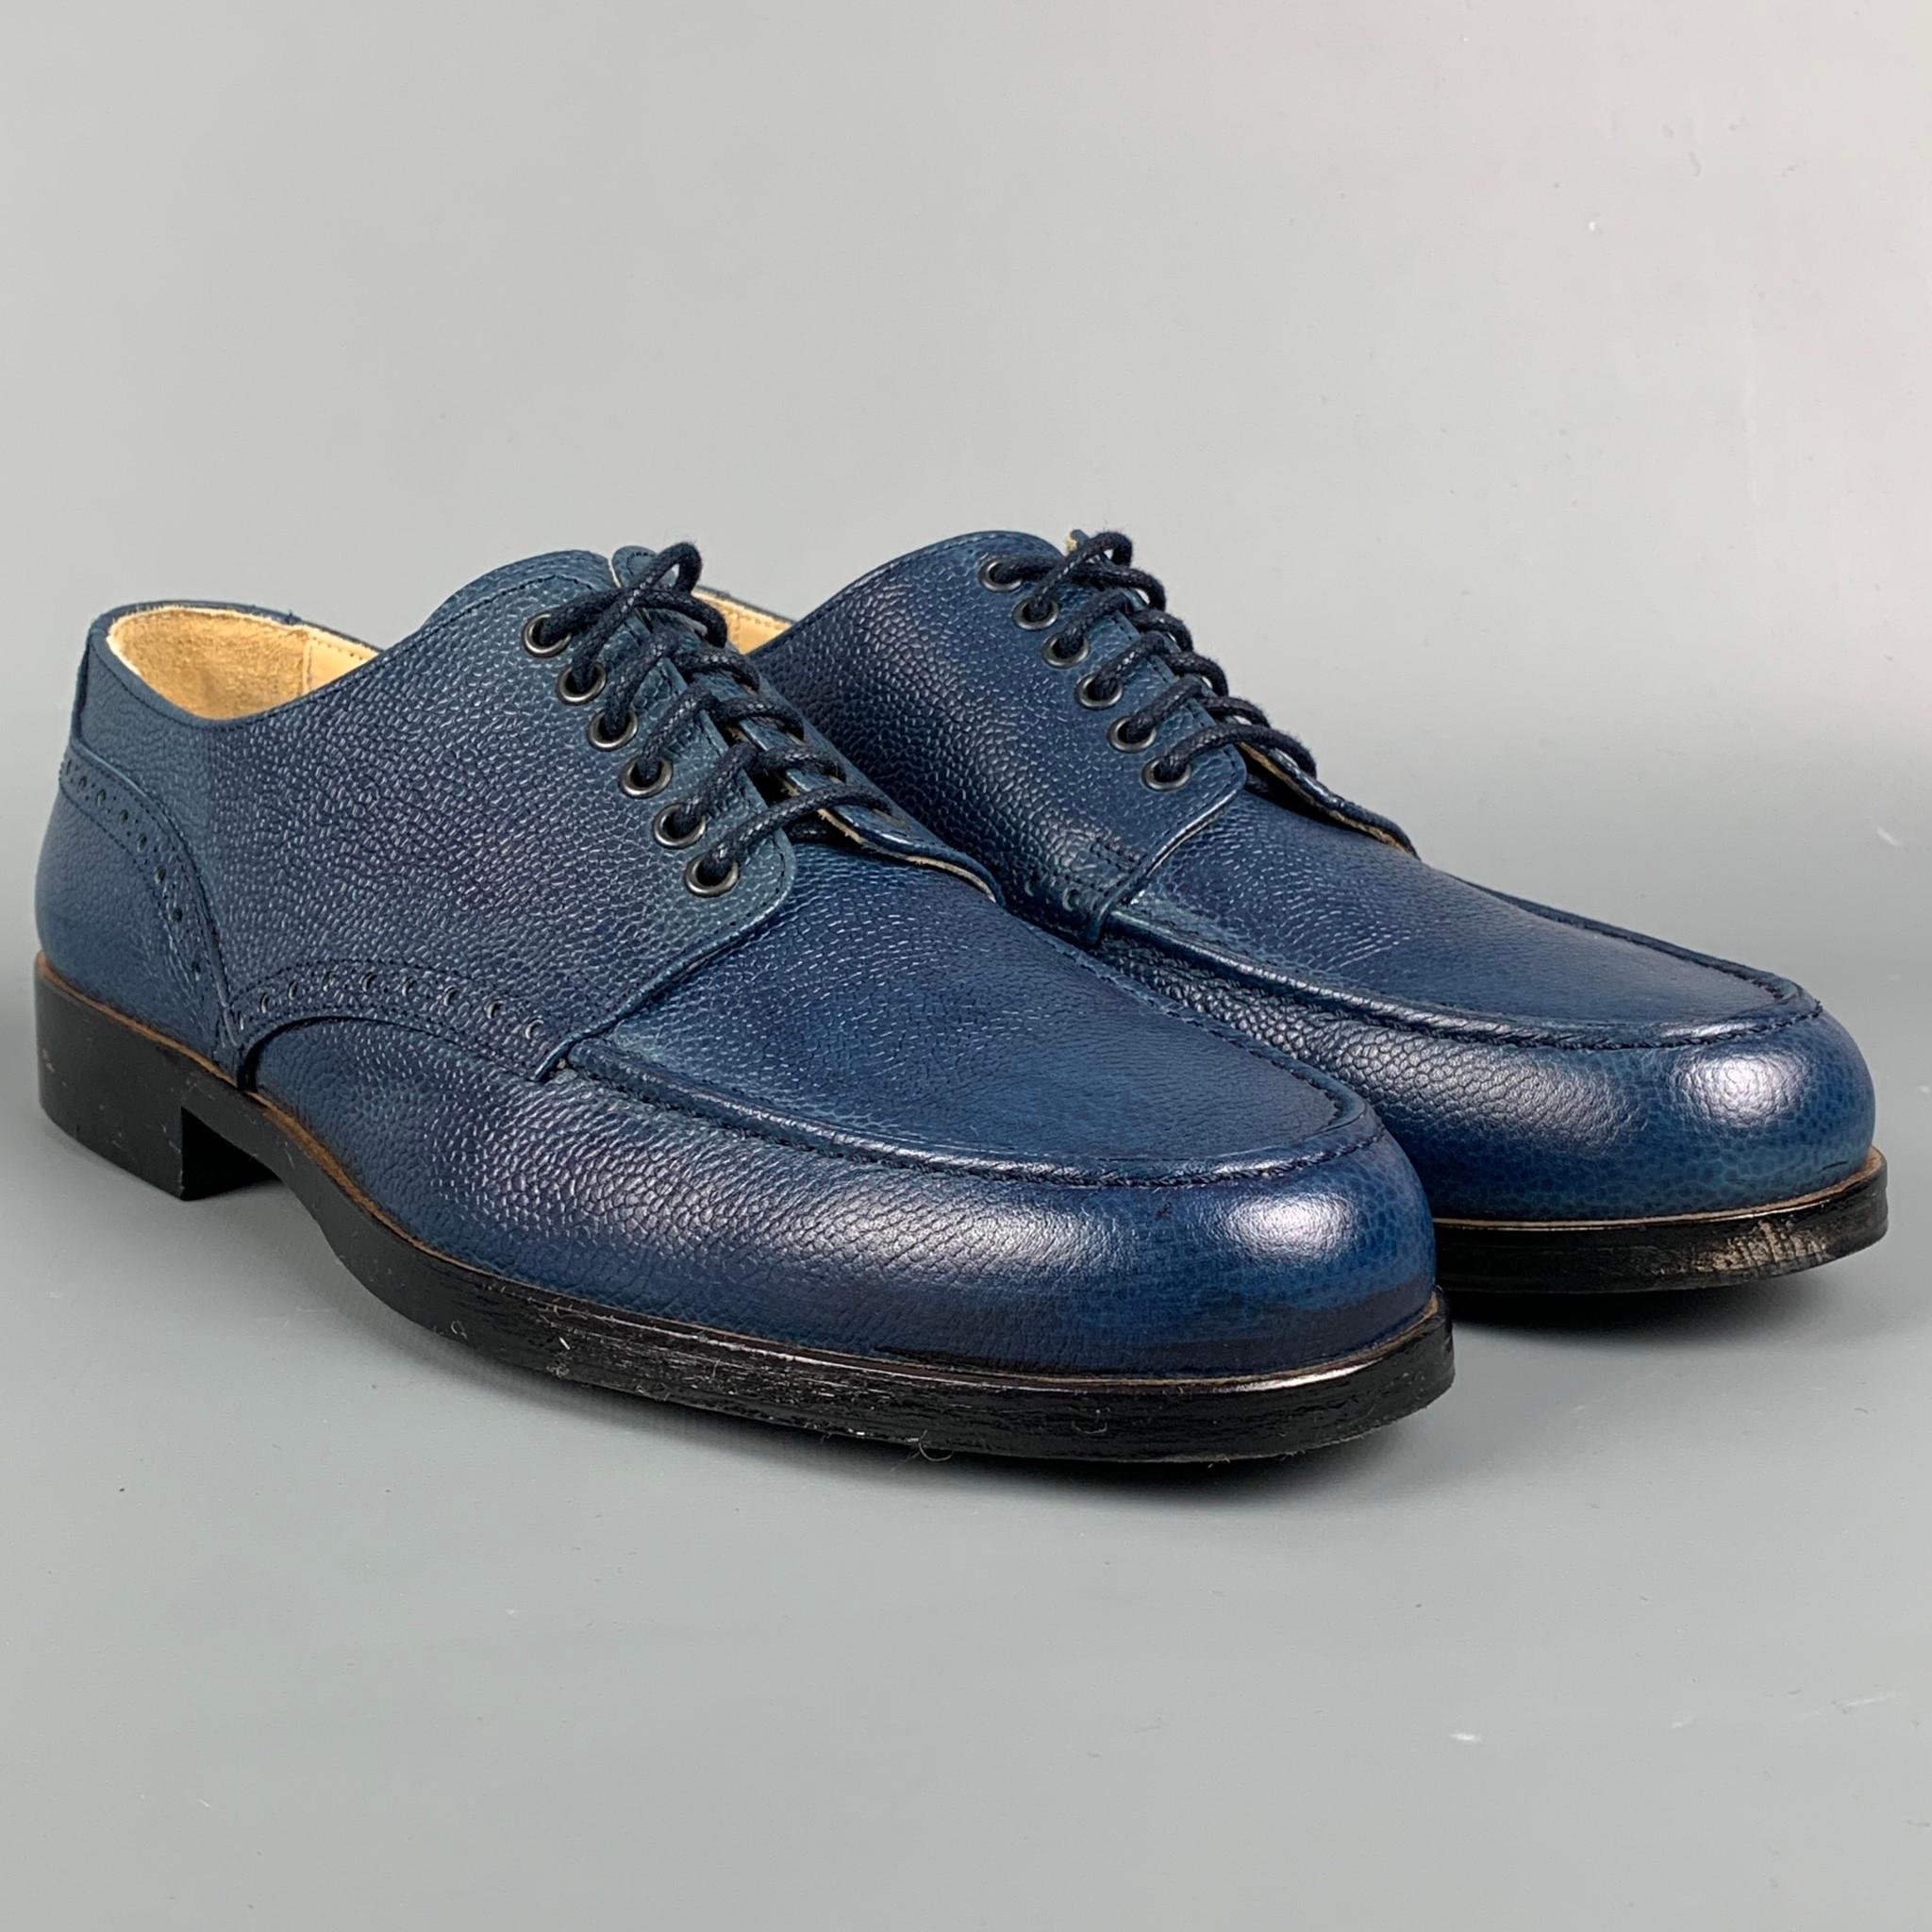 THE GENERIC MAN shoes comes in a royal blue pebble grain leather featuring a cap toe and a lace up closure. Made in Portugal. 

Very Good Pre-Owned Condition.
Marked: SQR4103 10

Outsole: 11.5 in. x 4 in. 